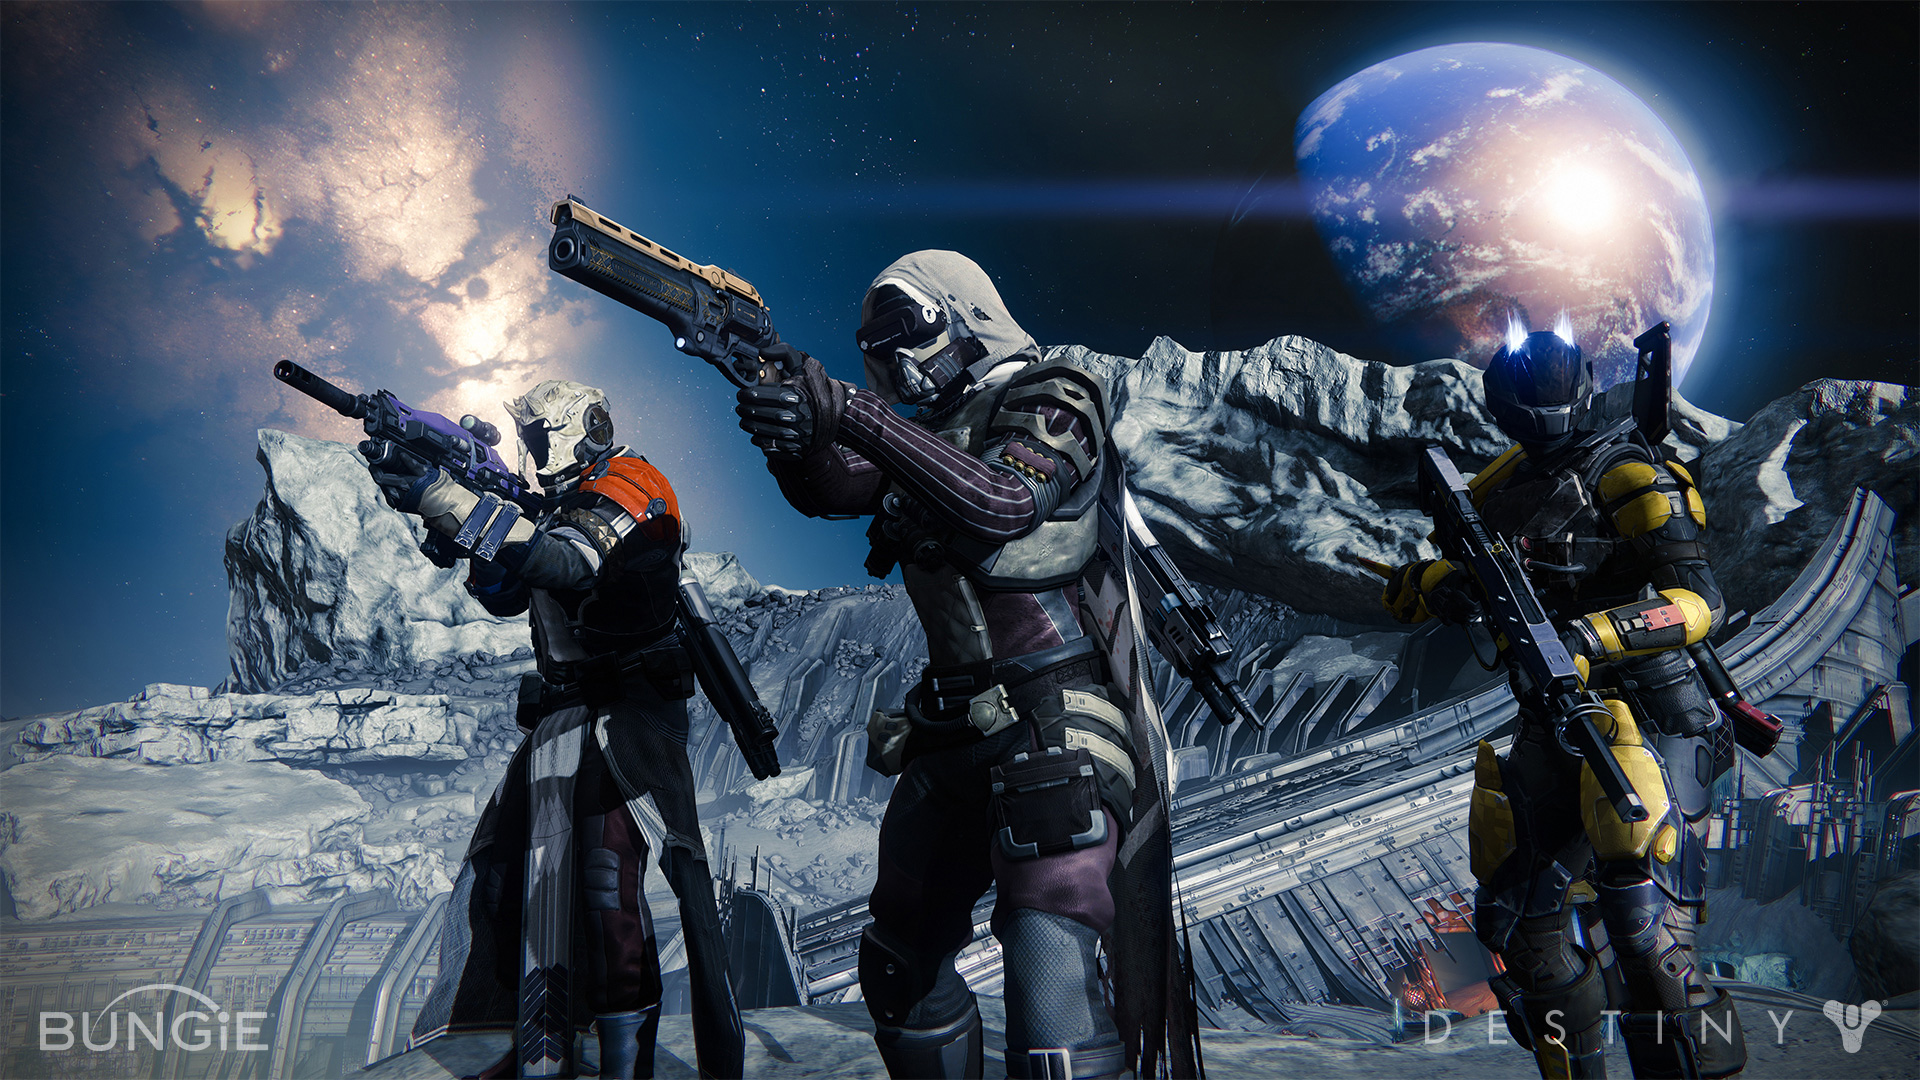 From left to right: Warlock, Hunter, and Titan.